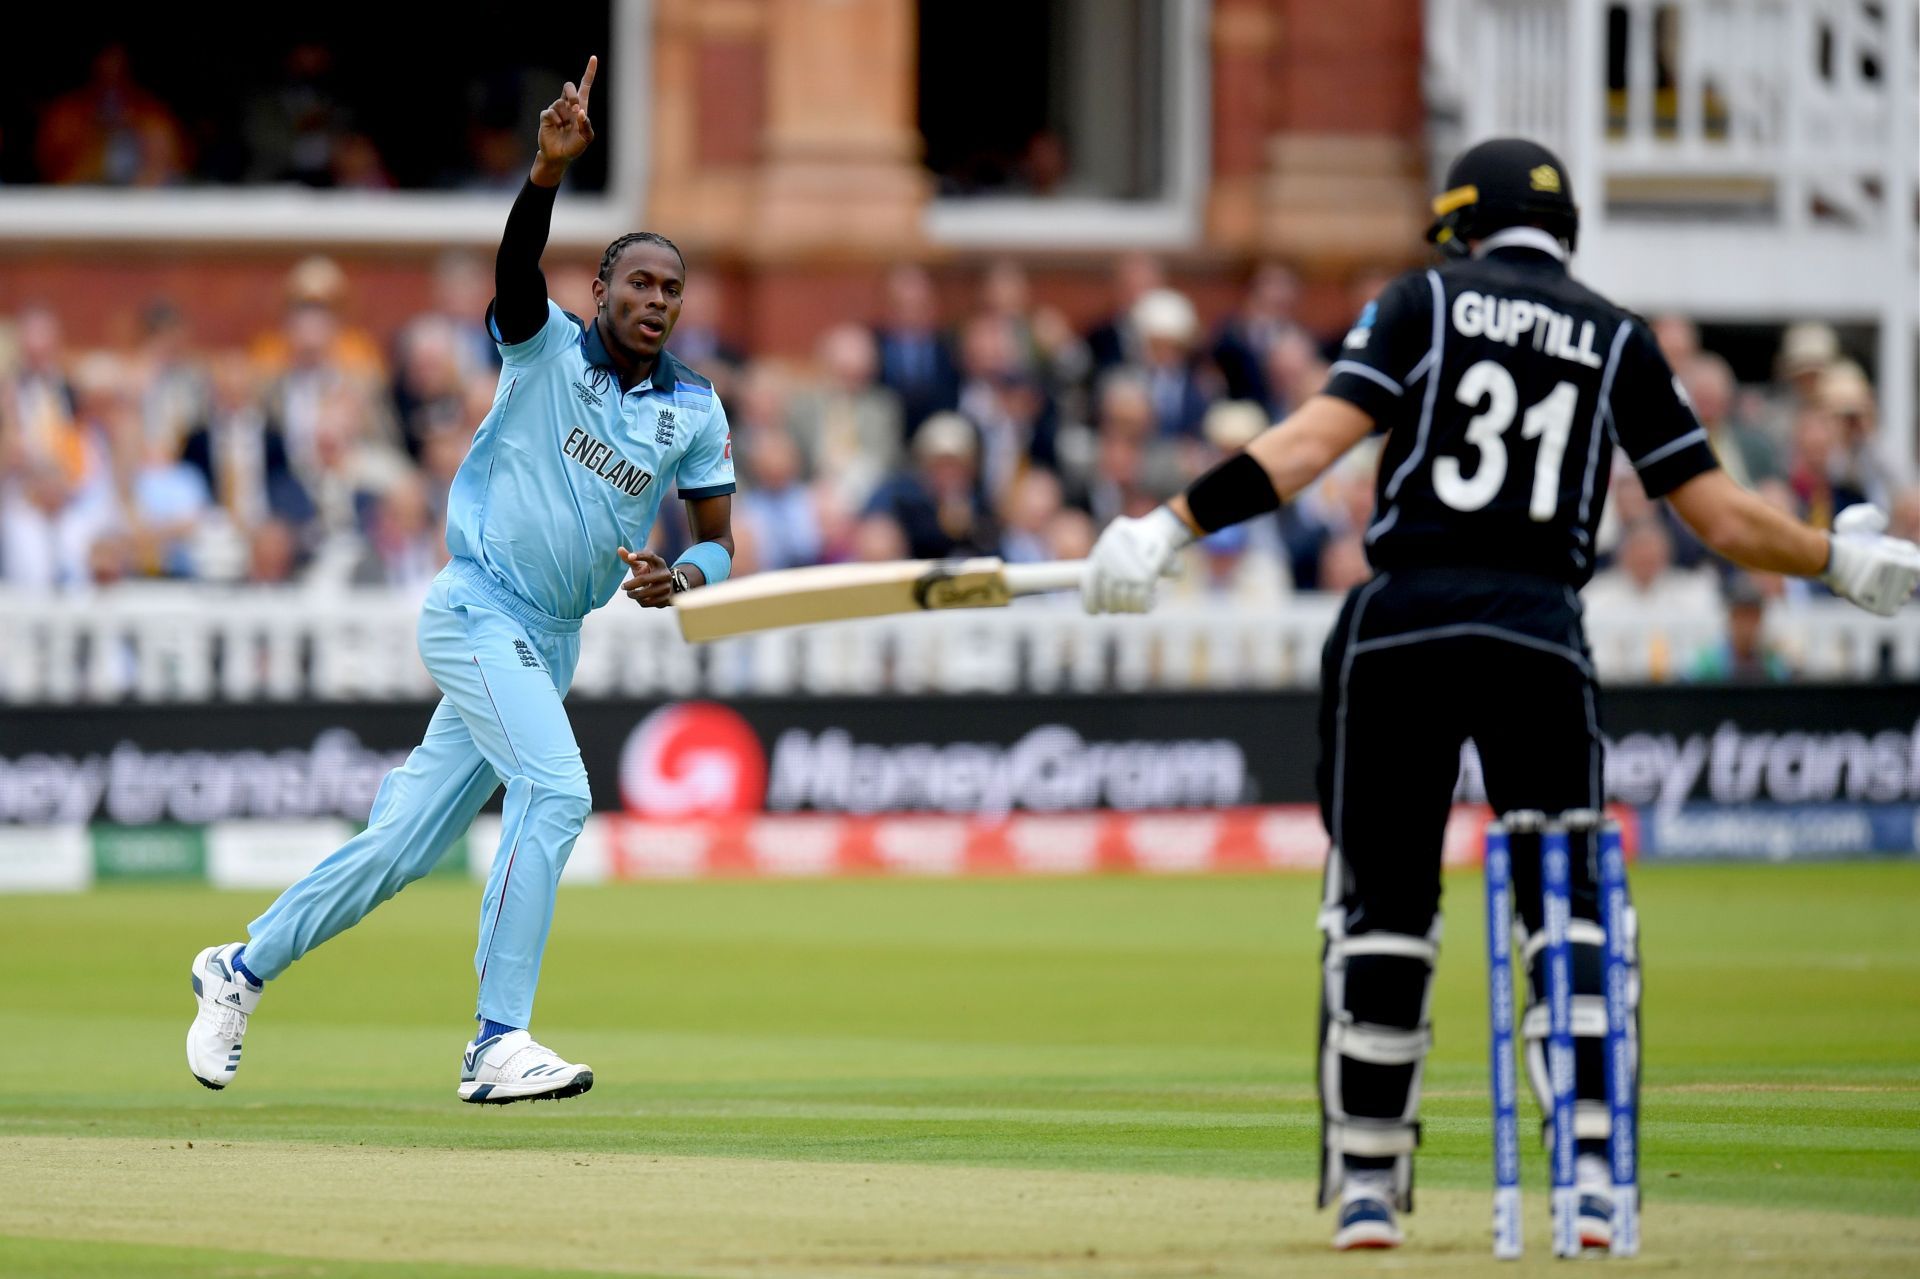 The England fast bowler in action during the 2019 World Cup final. (Pic: Getty Images)